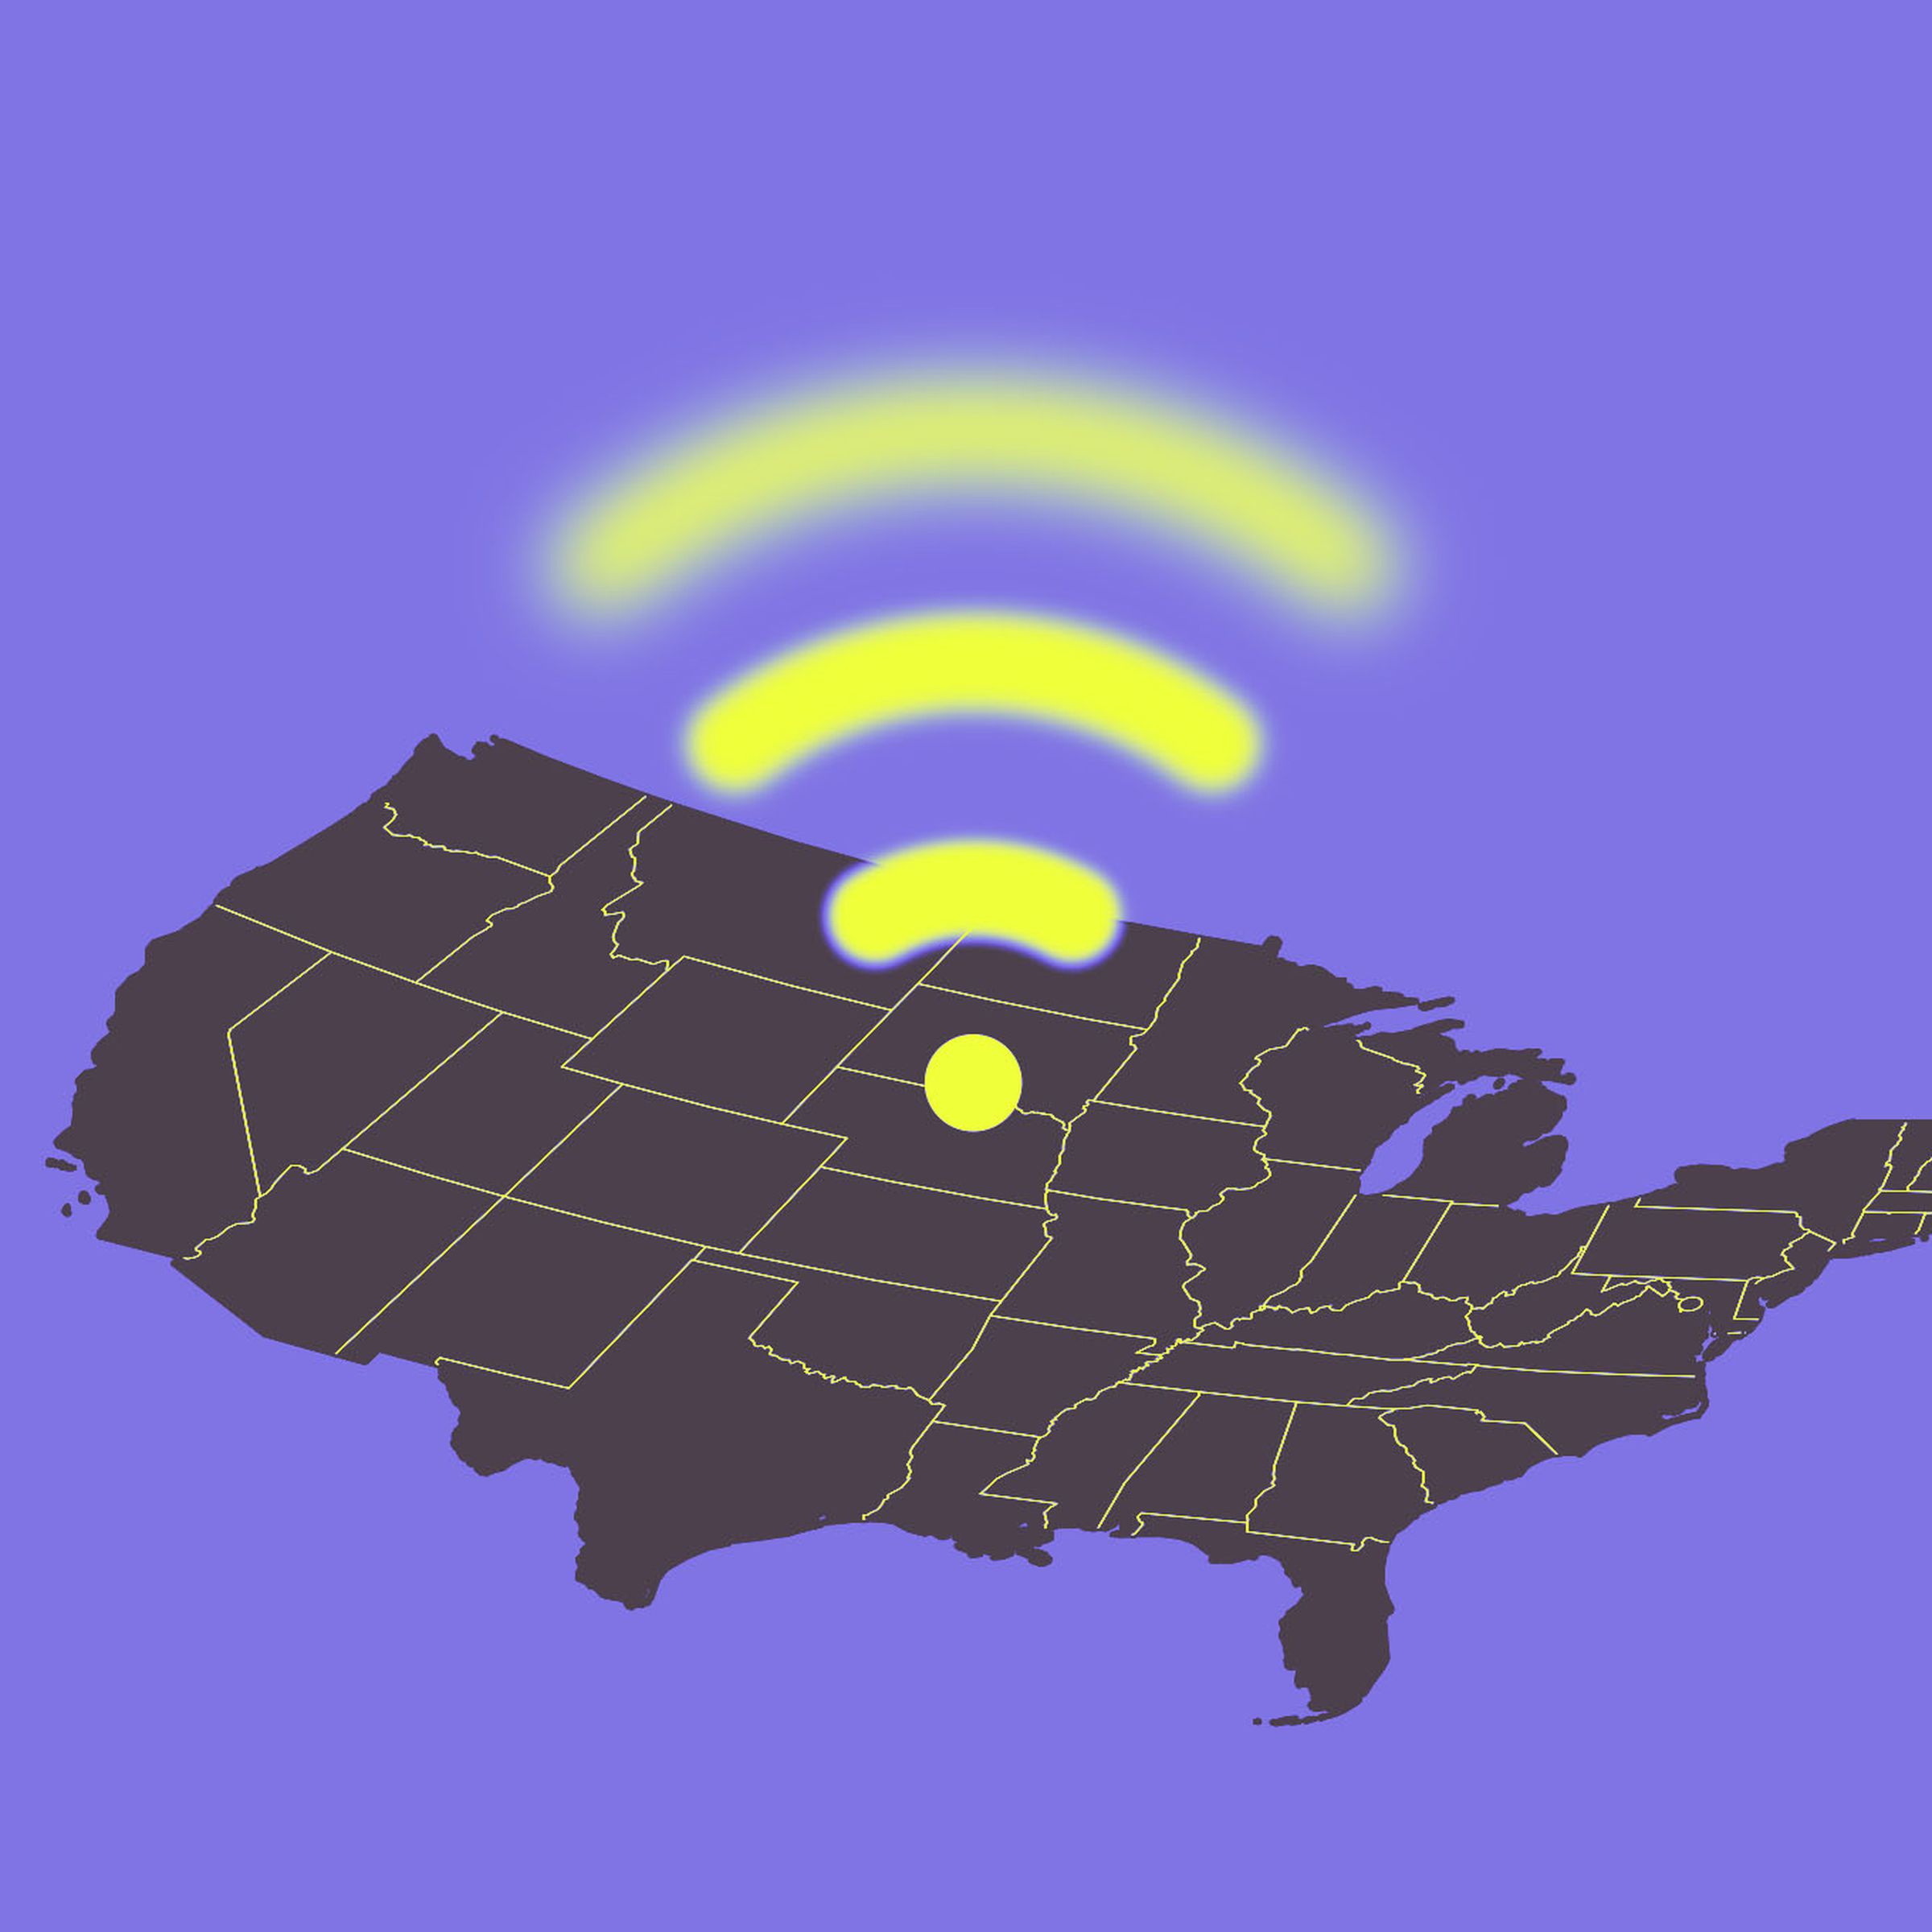 A fading Wifi symbol above the United States.